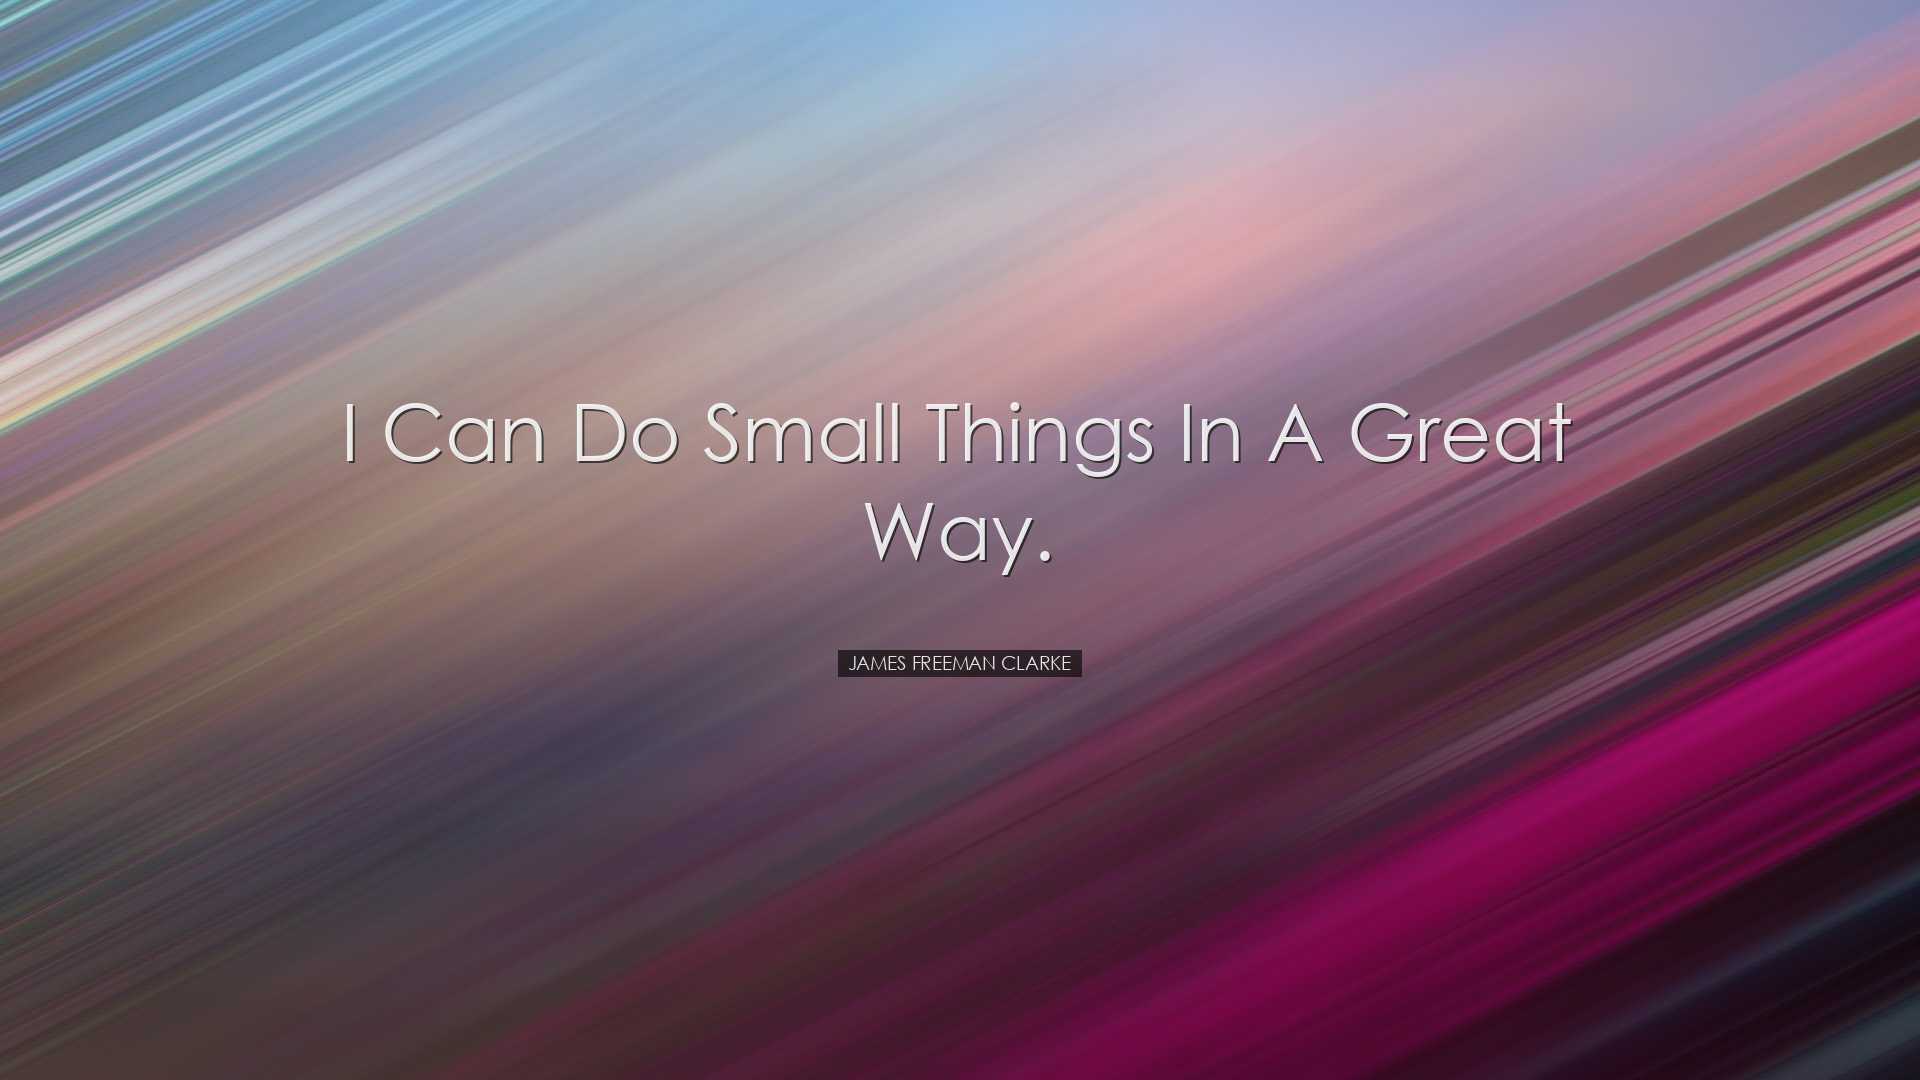 I can do small things in a great way. - James Freeman Clarke